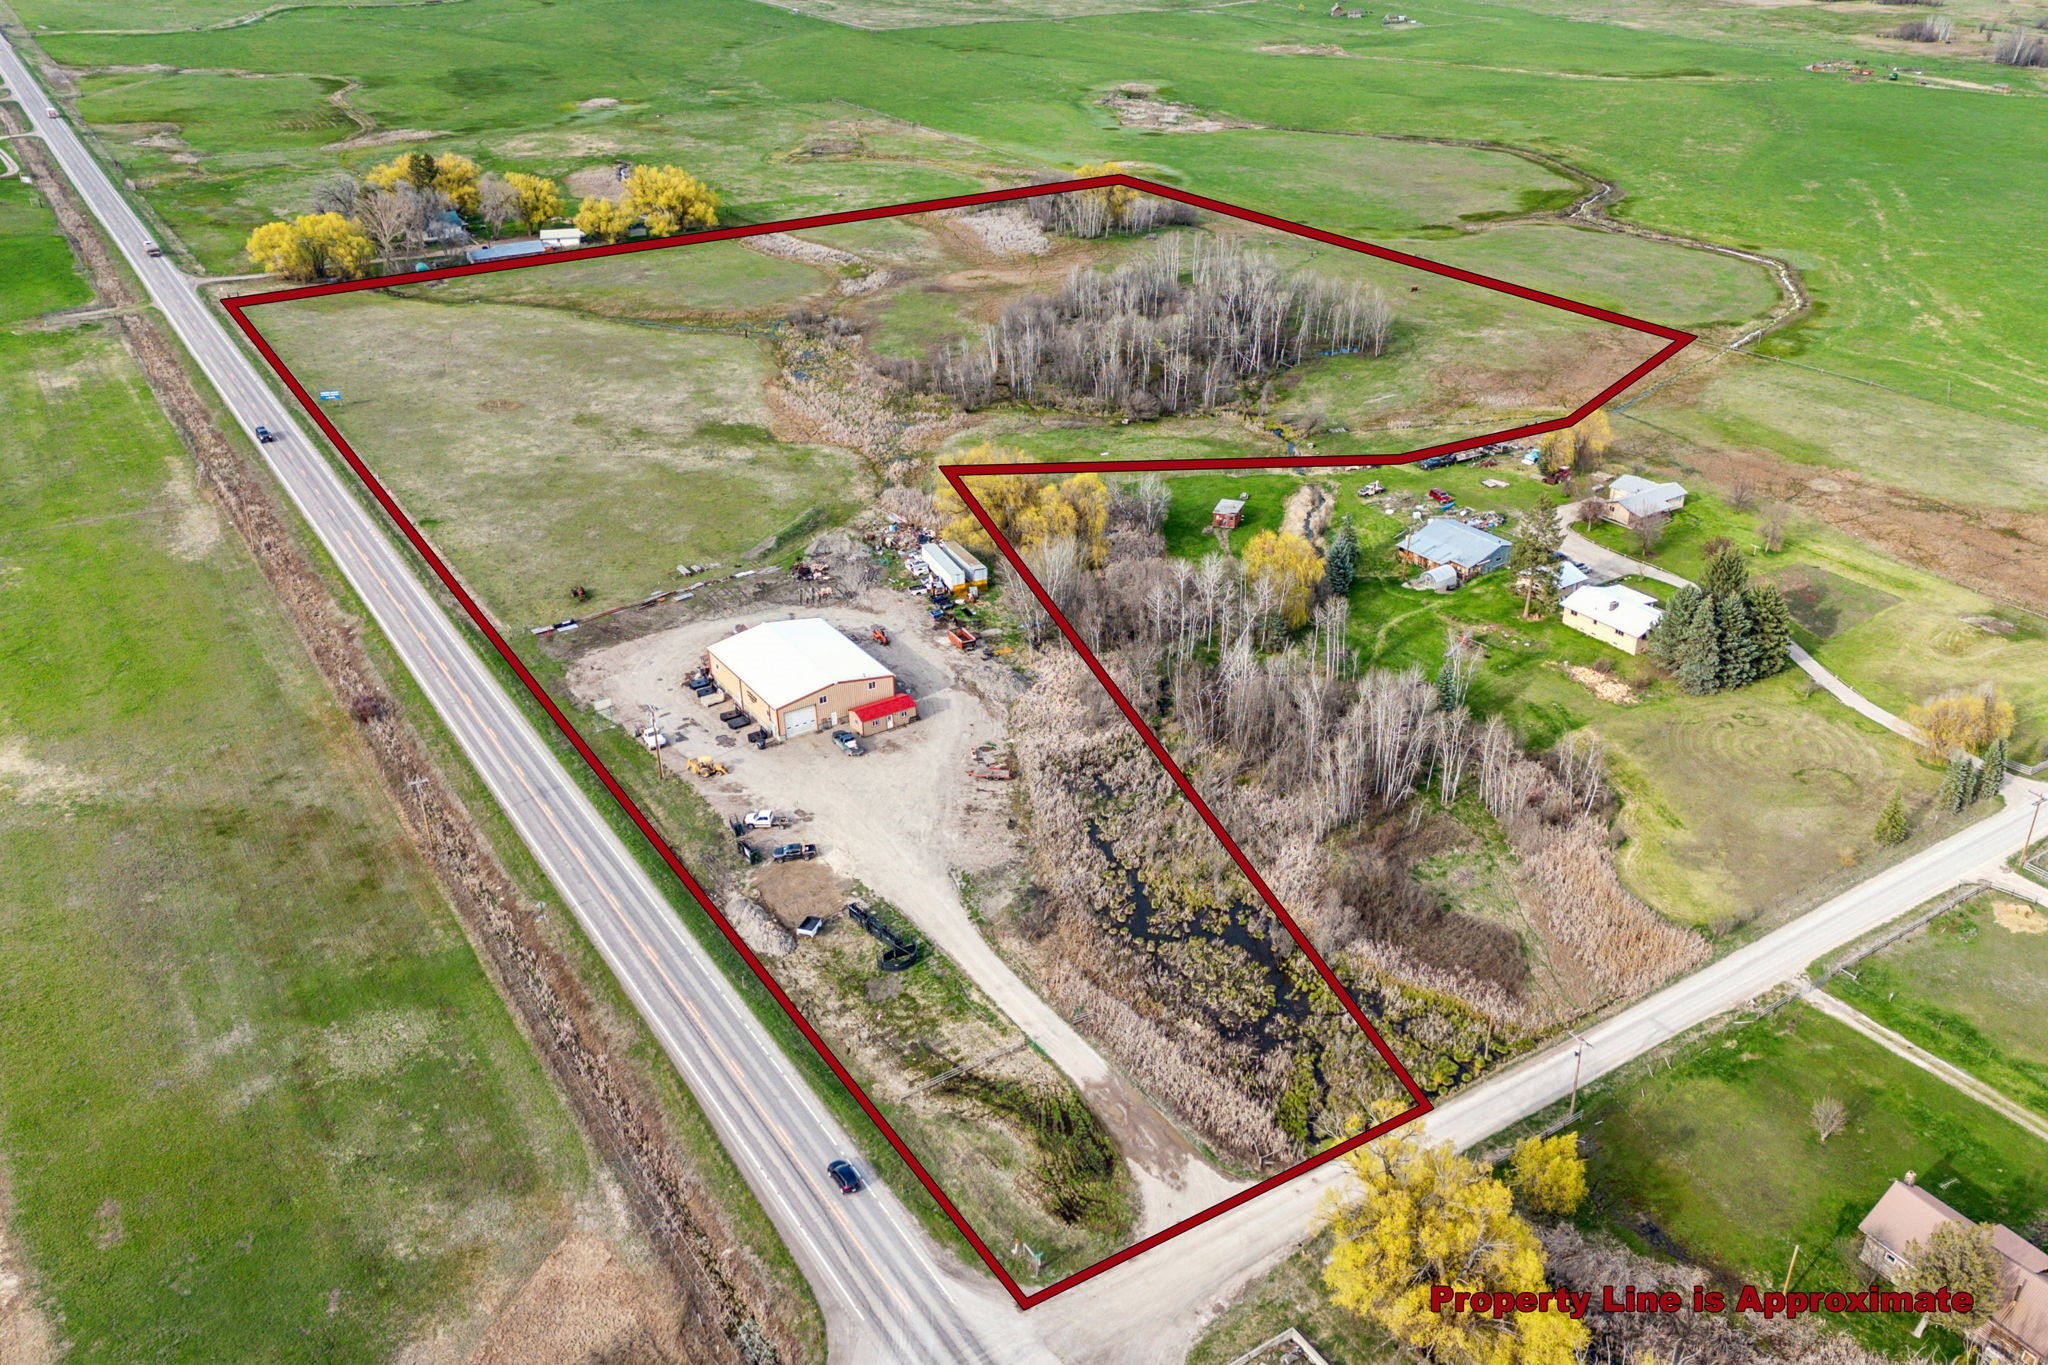 4800 sq. ft. Light Industrial Building on 20+ acres with beautiful Mission Mountain views, 1/4 mile of Hwy 93 Frontage just north St. Ignatius, MT. Useable property area estimated at 5.2 acres.  The 60’x80’ metal building has power & is insulated on approximately 1.45 acres.  Operable windows on all sides, overhead doors & man doors on 3 sides provide ample access, natural light & ventilation. Open floor plan and 16ft + clear ceiling height offers an array of uses. Holding tank for bathroom vs septic due to ground water. Easy HWY 93 access. Additional 3.75 acres deal for additional warehouse or storage units. Call Jason Shreder @ 406-370-4436, Katie Ward @ 406-596-4000 or your real estate professional. New well must be drilled within 4 months of closing. Current well servicing property is on neighboring site.